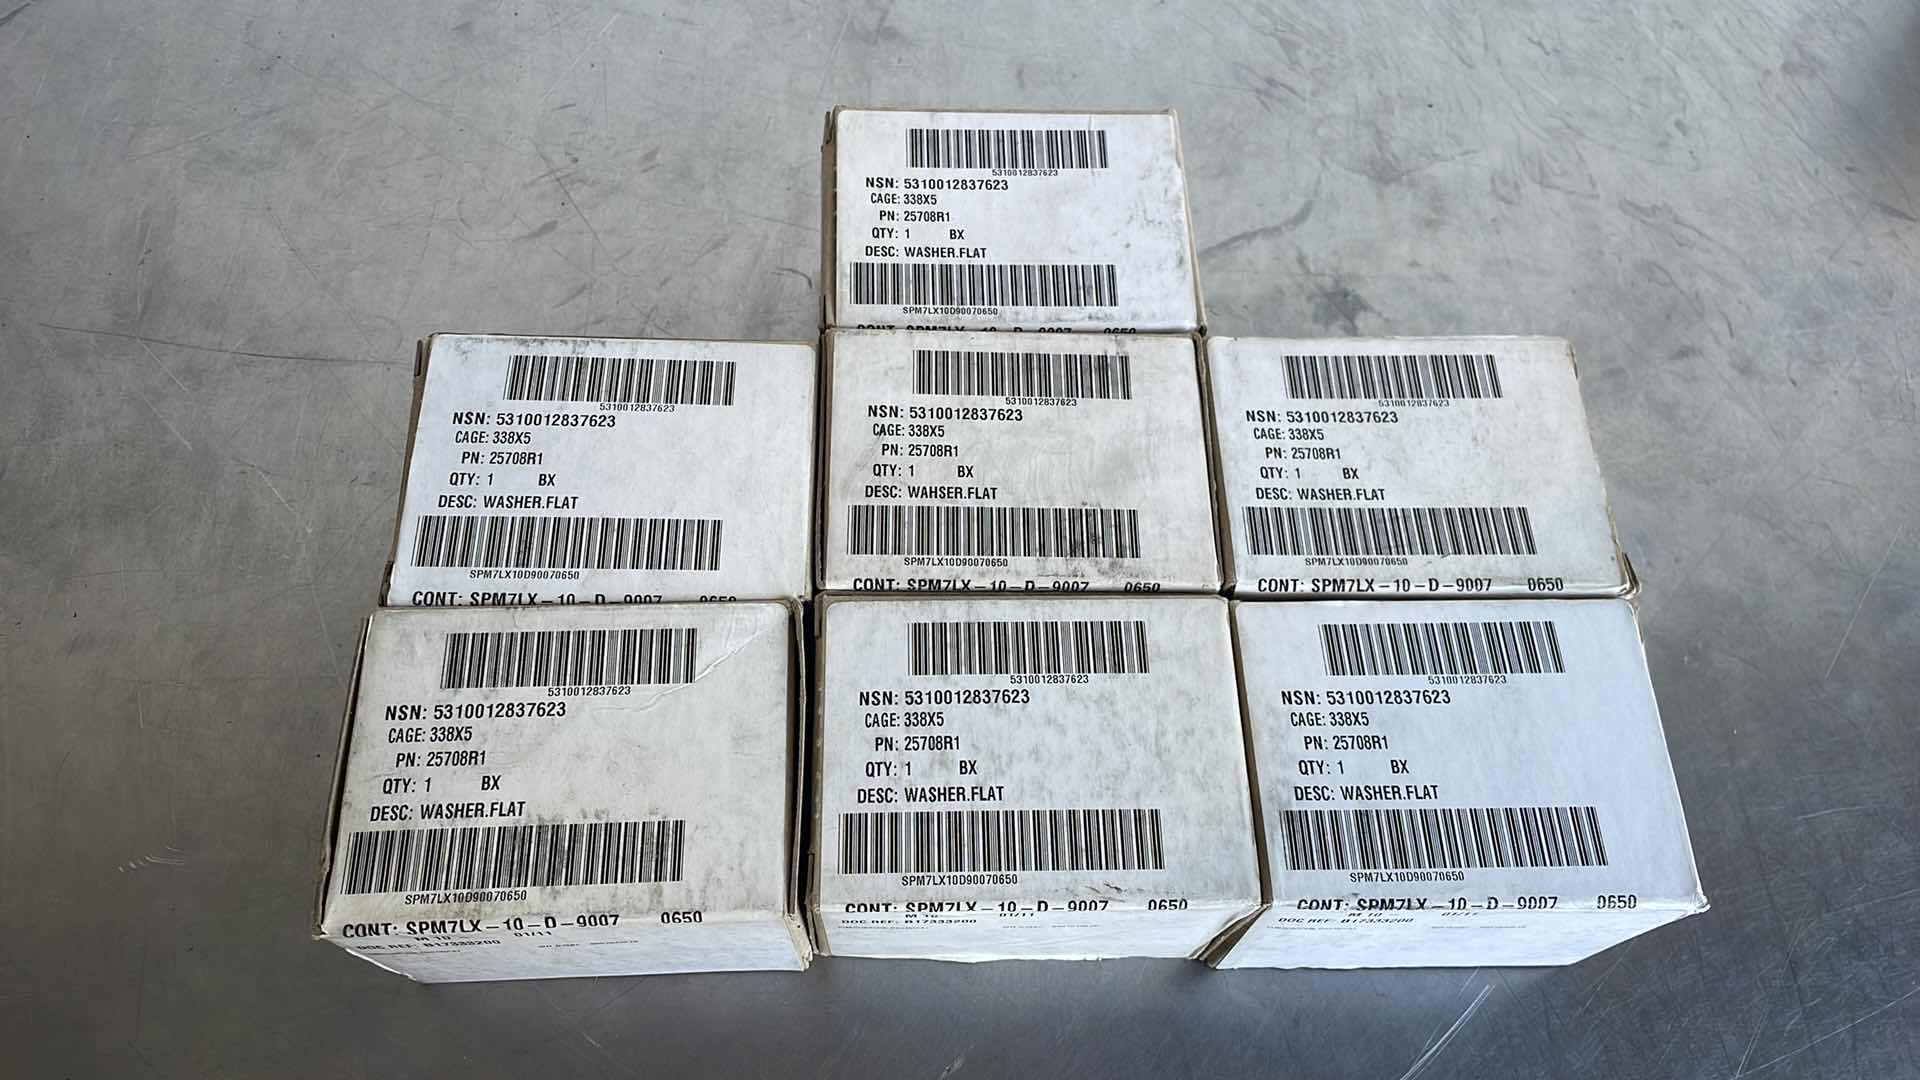 Photo 1 of FLAT WASHER 5/16” PN 25708R1 (7 BOXES)